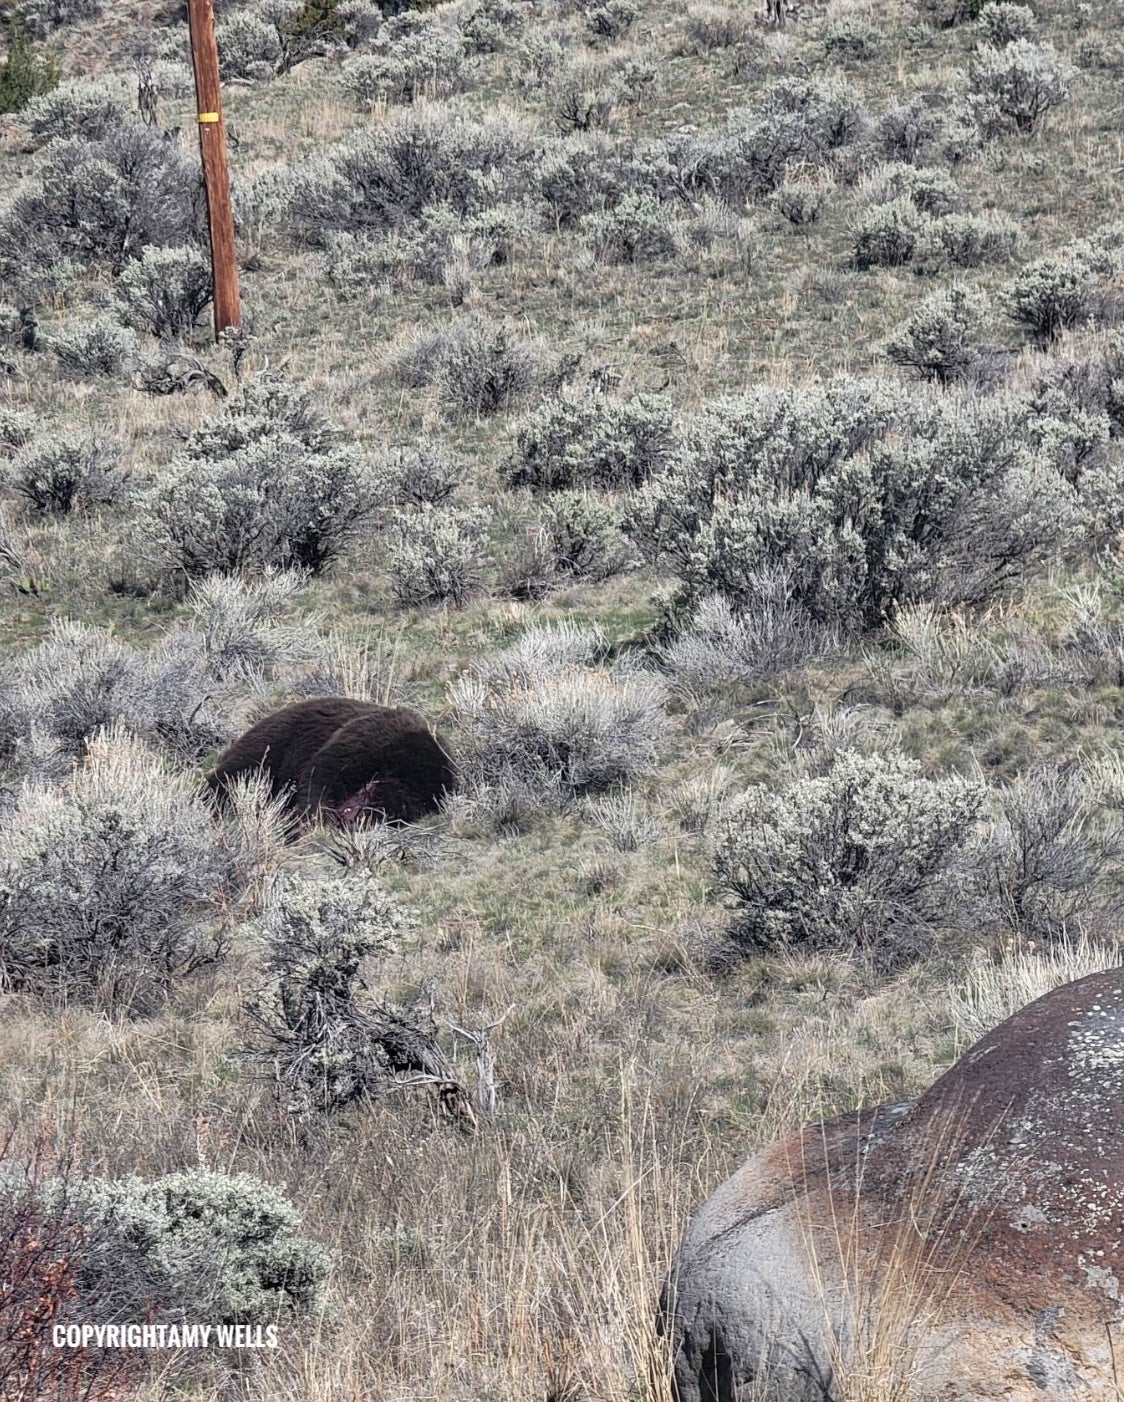 Was the Massive Grizzly Found Dead Near Yellowstone National Park Poached?